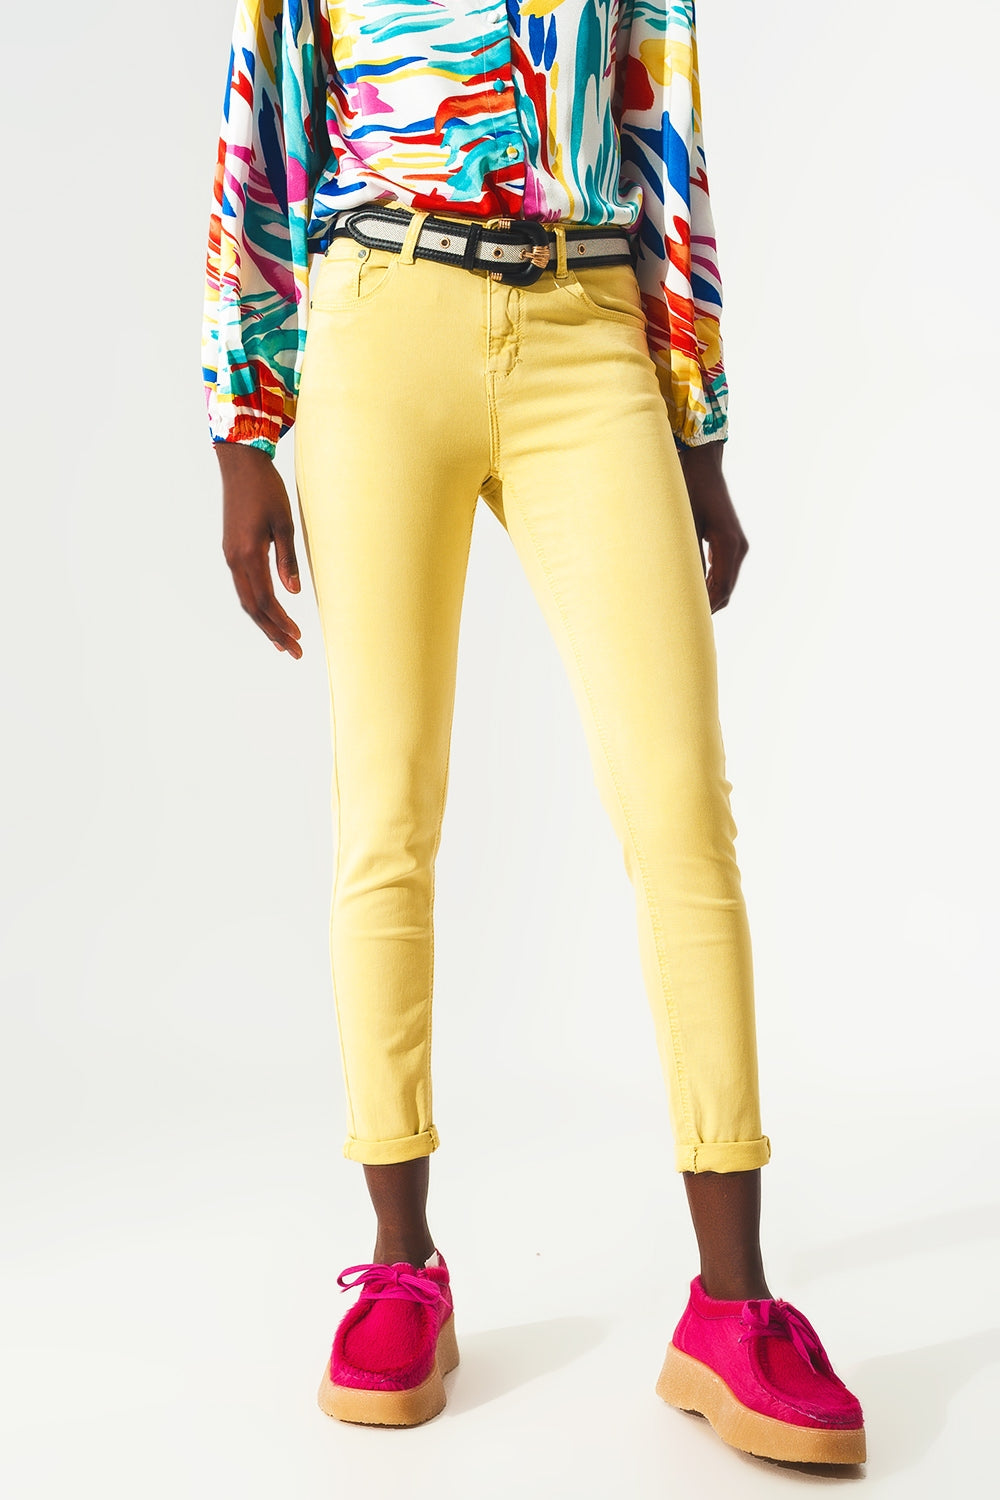 Q2 Yellow ankle jeans with soft wrinkles